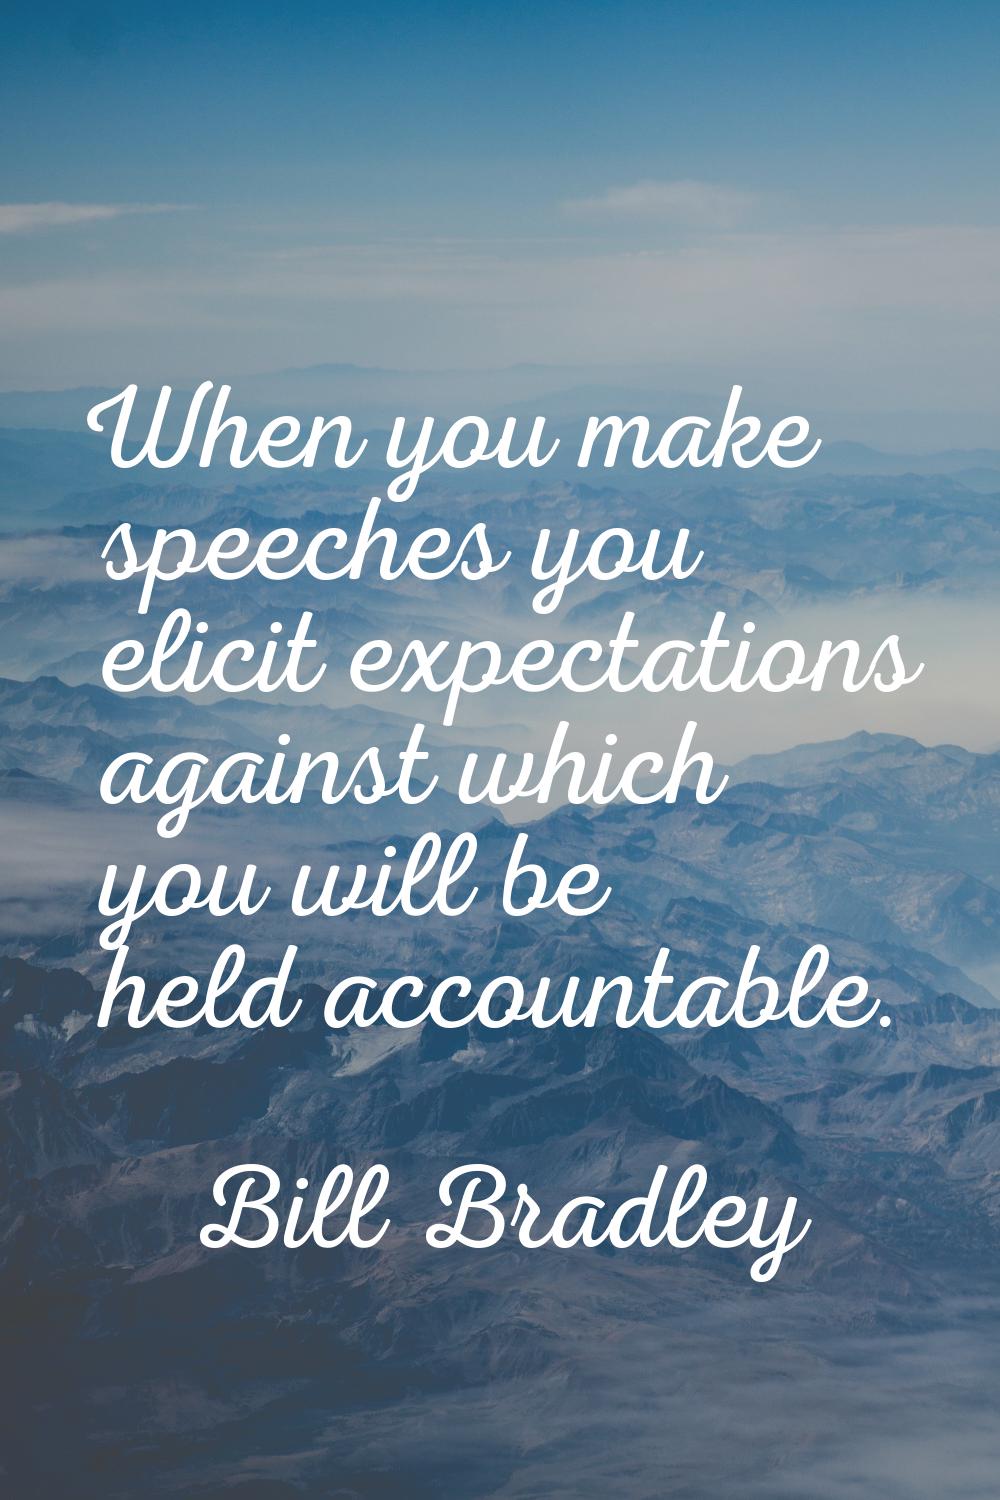 When you make speeches you elicit expectations against which you will be held accountable.